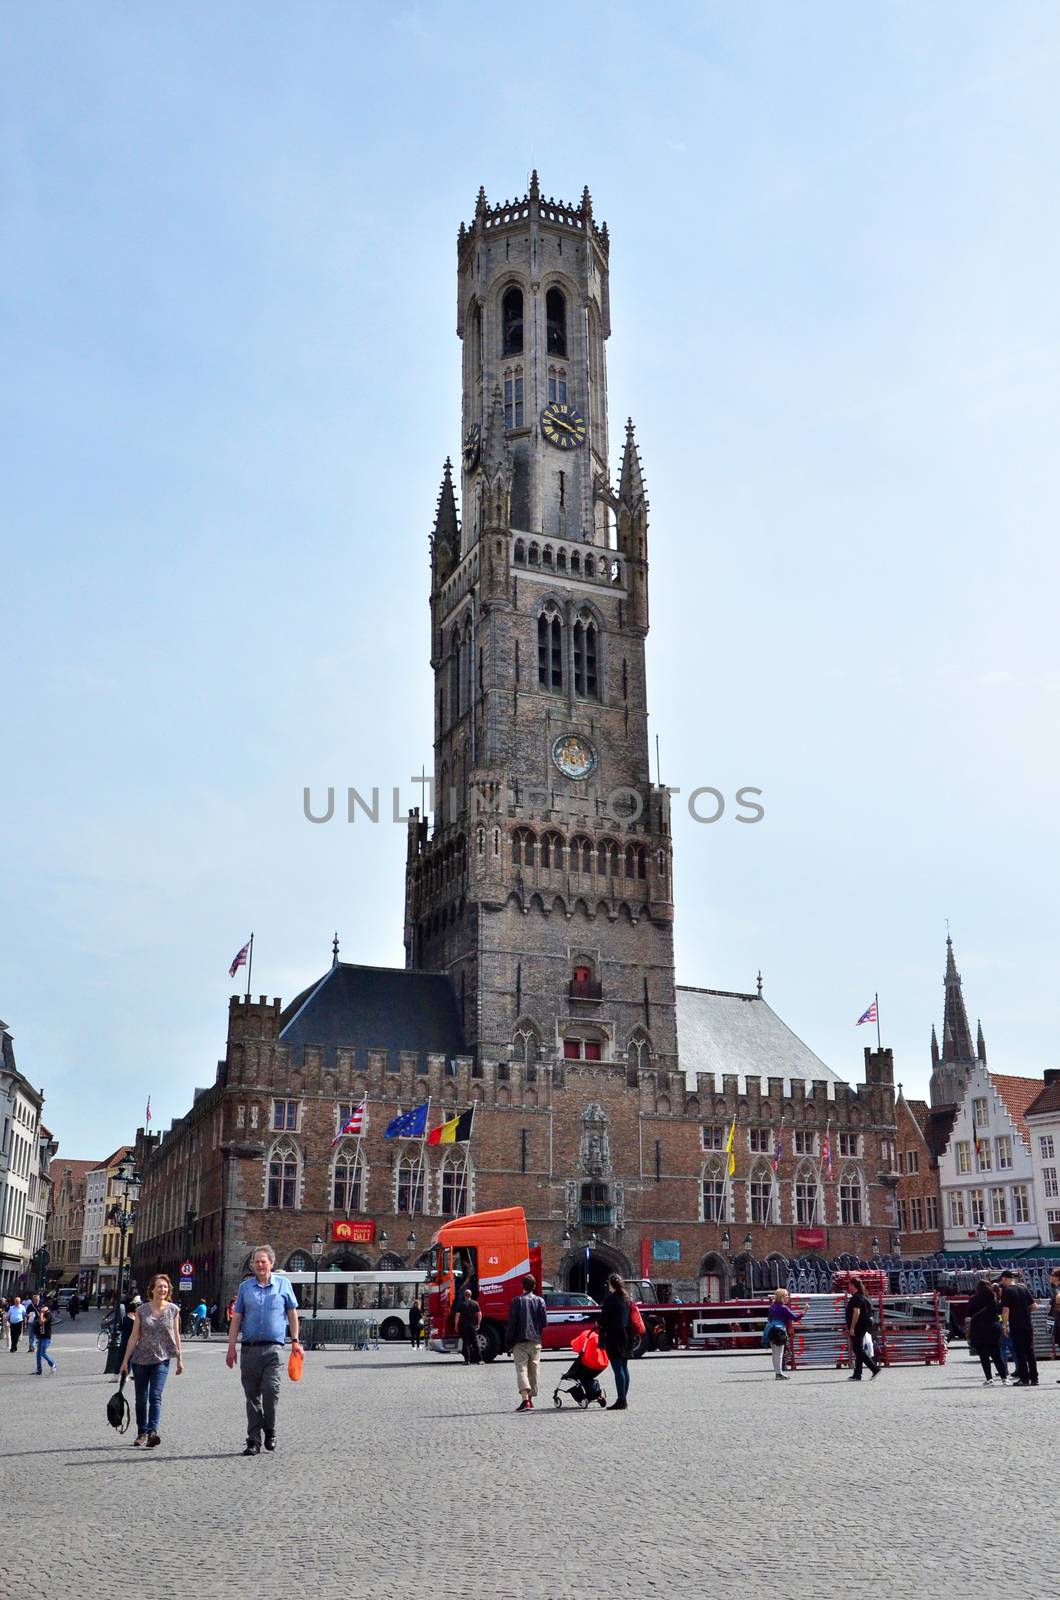 Bruges, Belgium - May 11, 2015: Tourist visit Belfry of Bruges on Grote Markt square on May 11, 2015. The historic city centre is a prominent World Heritage Site of UNESCO.